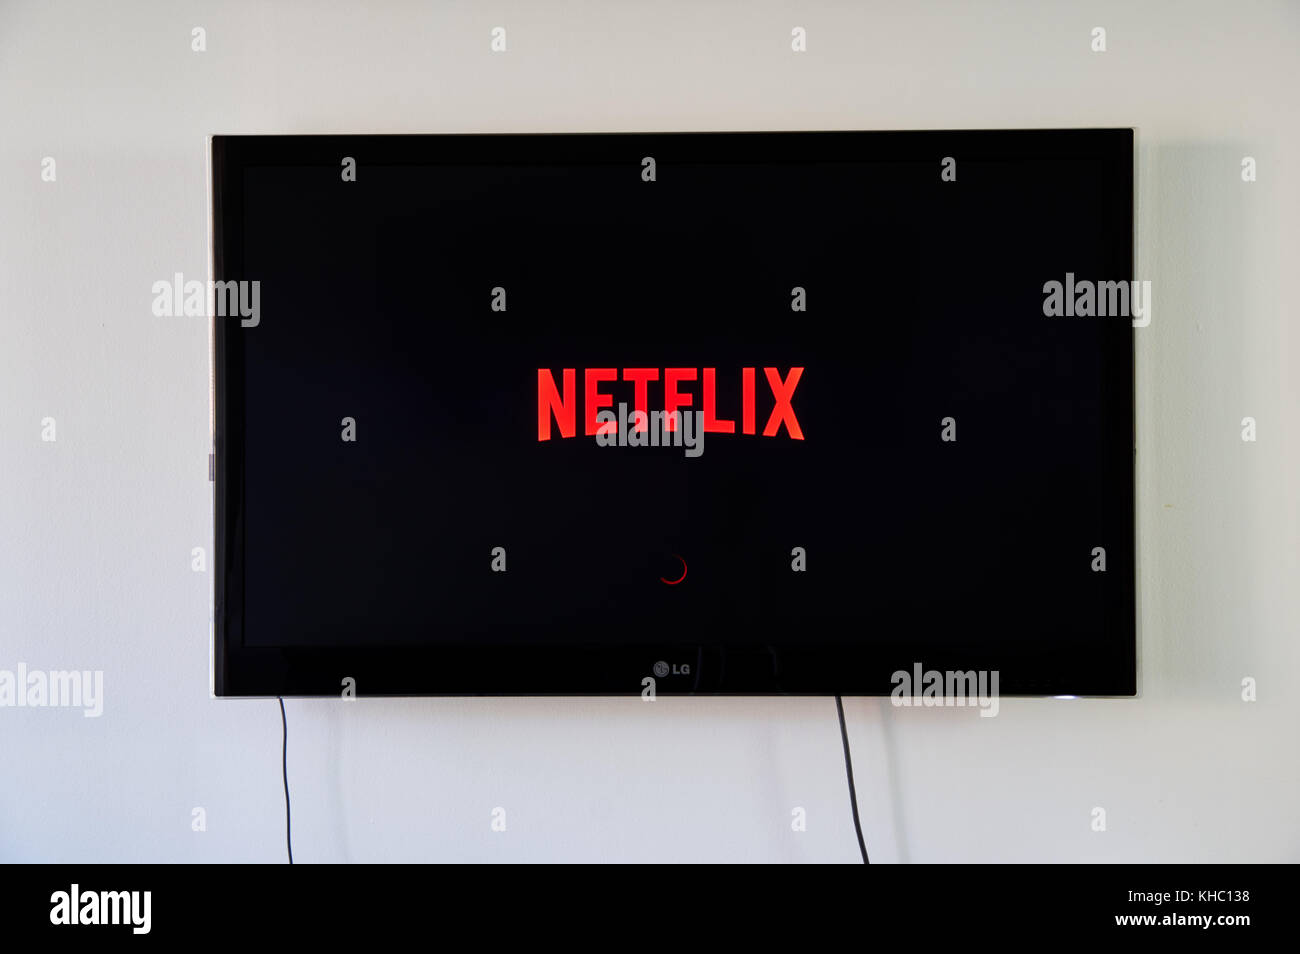 MONTREAL, CANADA - NOVEMBER 15, 2017: Netflix logo on LG TV. Netflix is an American entertainment company founded by Reed Hastings and Marc Randolph o Stock Photo